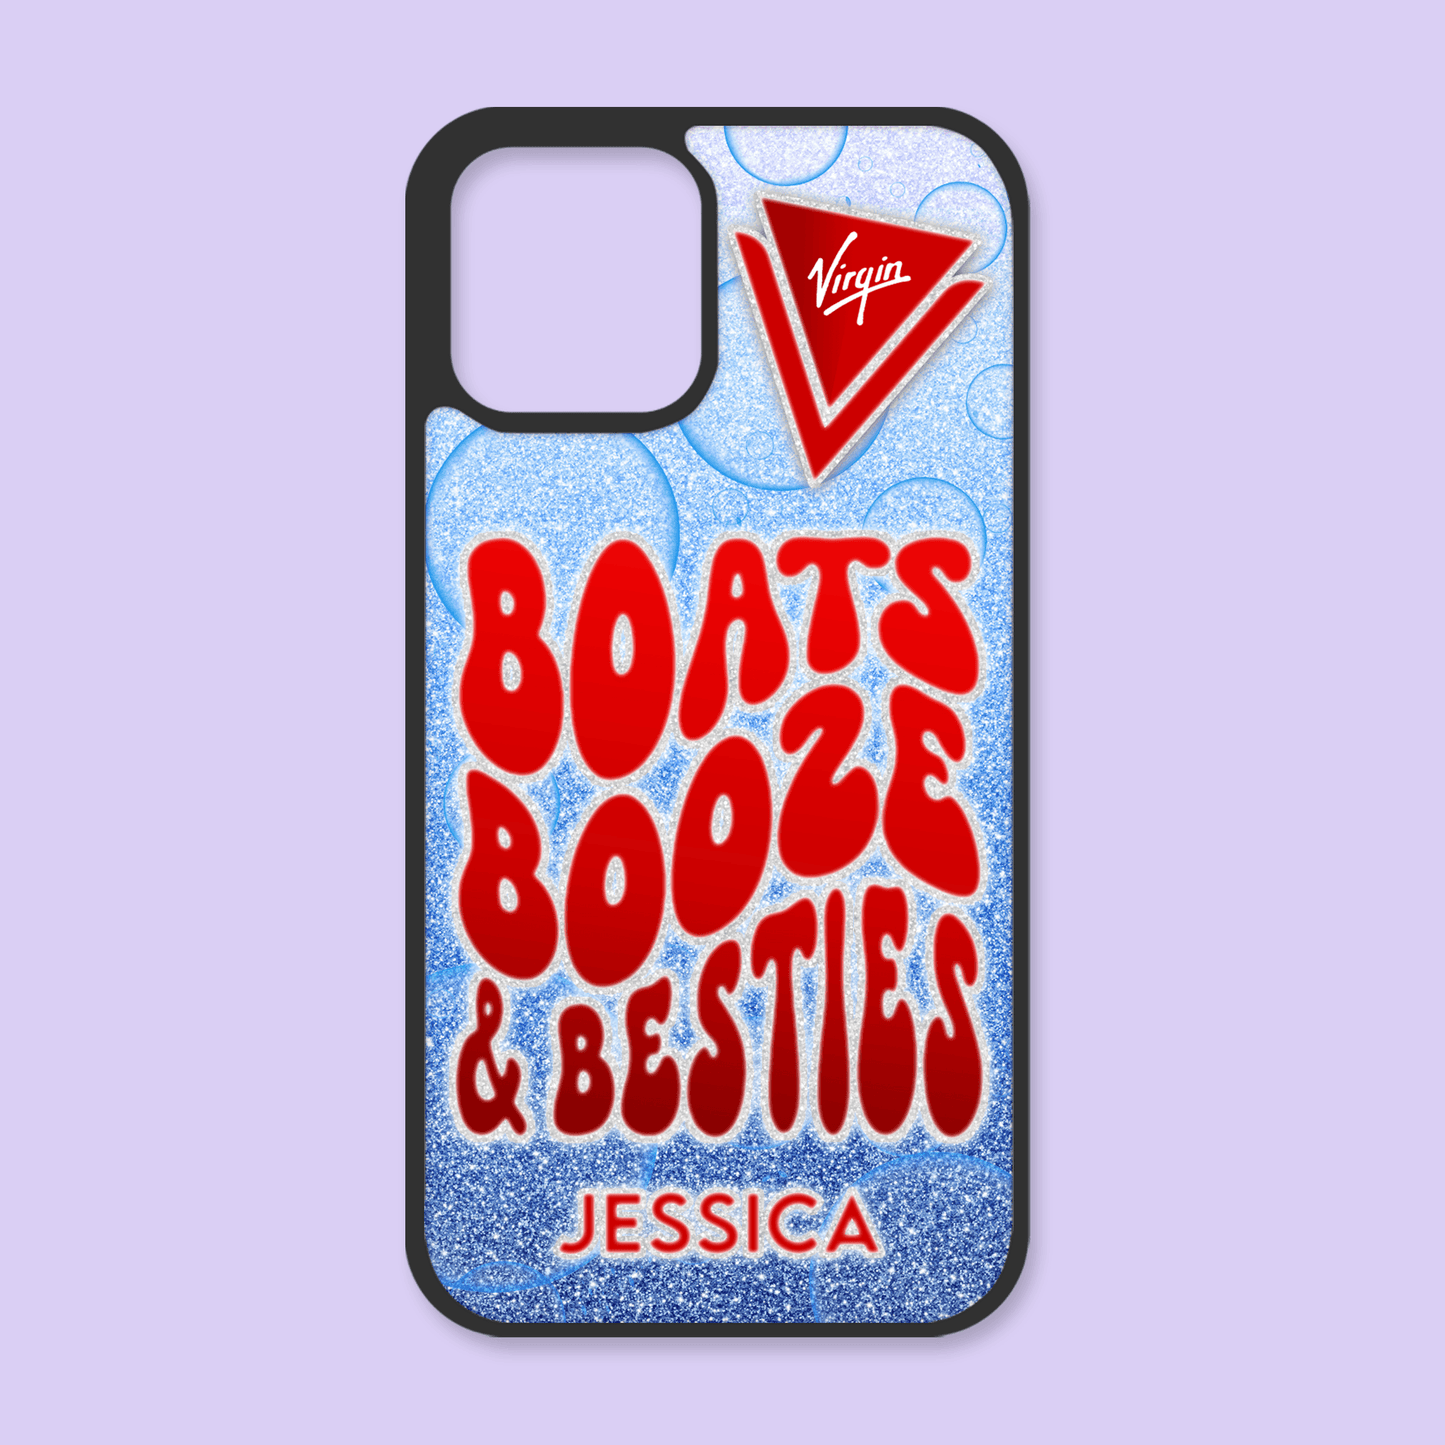 Virgin Voyages Bachelorette Personalized Phone Case - Boats, Booze & Besties - Two Crafty Gays